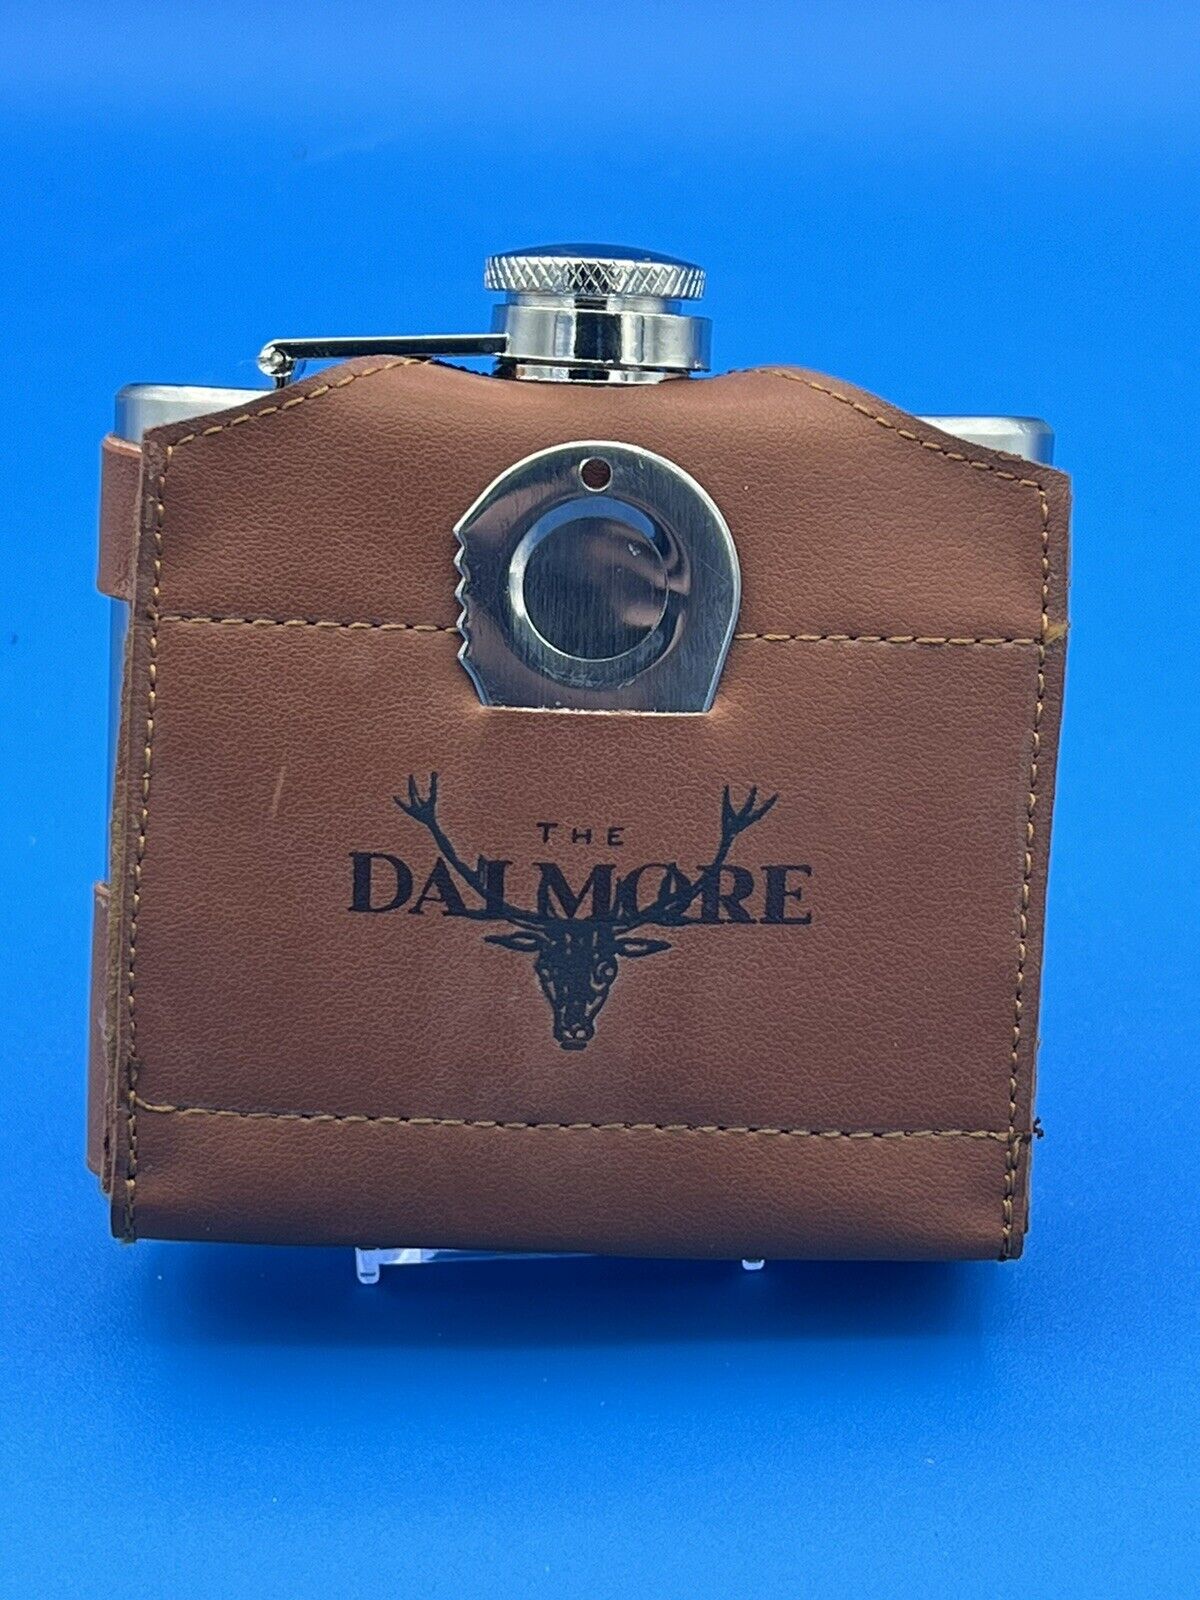 The Dalmore Scotch Whiskey Hip Flask Stainless Steel 6 oz Org Pkg Golf Themed